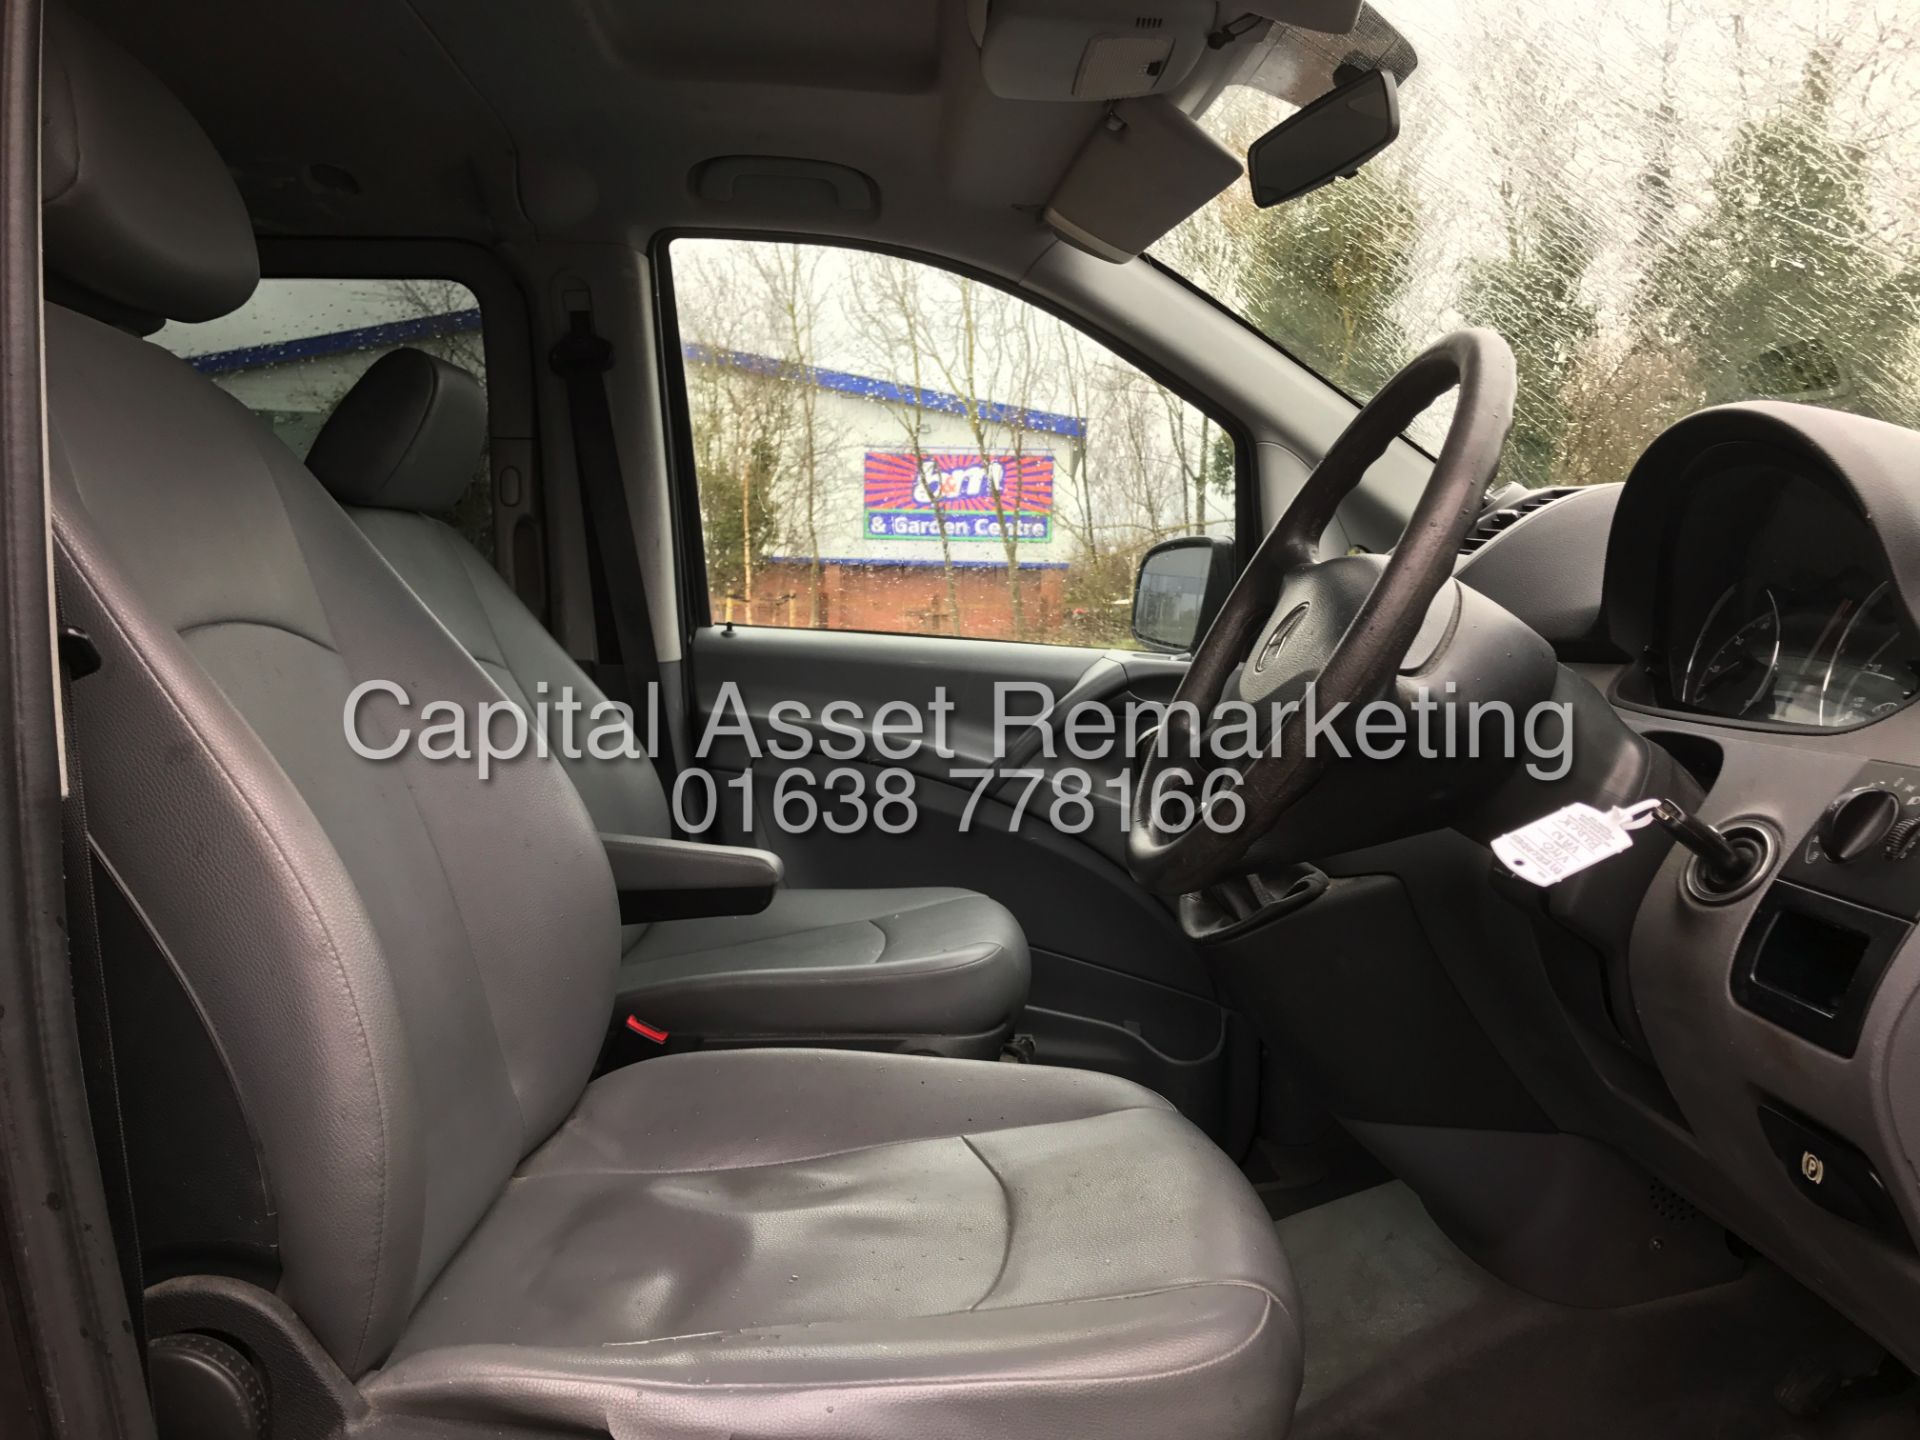 (ON SALE) MERCEDES VITO "SPORTY - 115BHP" LWB (2011 MODEL) 5 SEATER DUELINER -1 OWNER-AIR CON-ALLOYS - Image 10 of 18